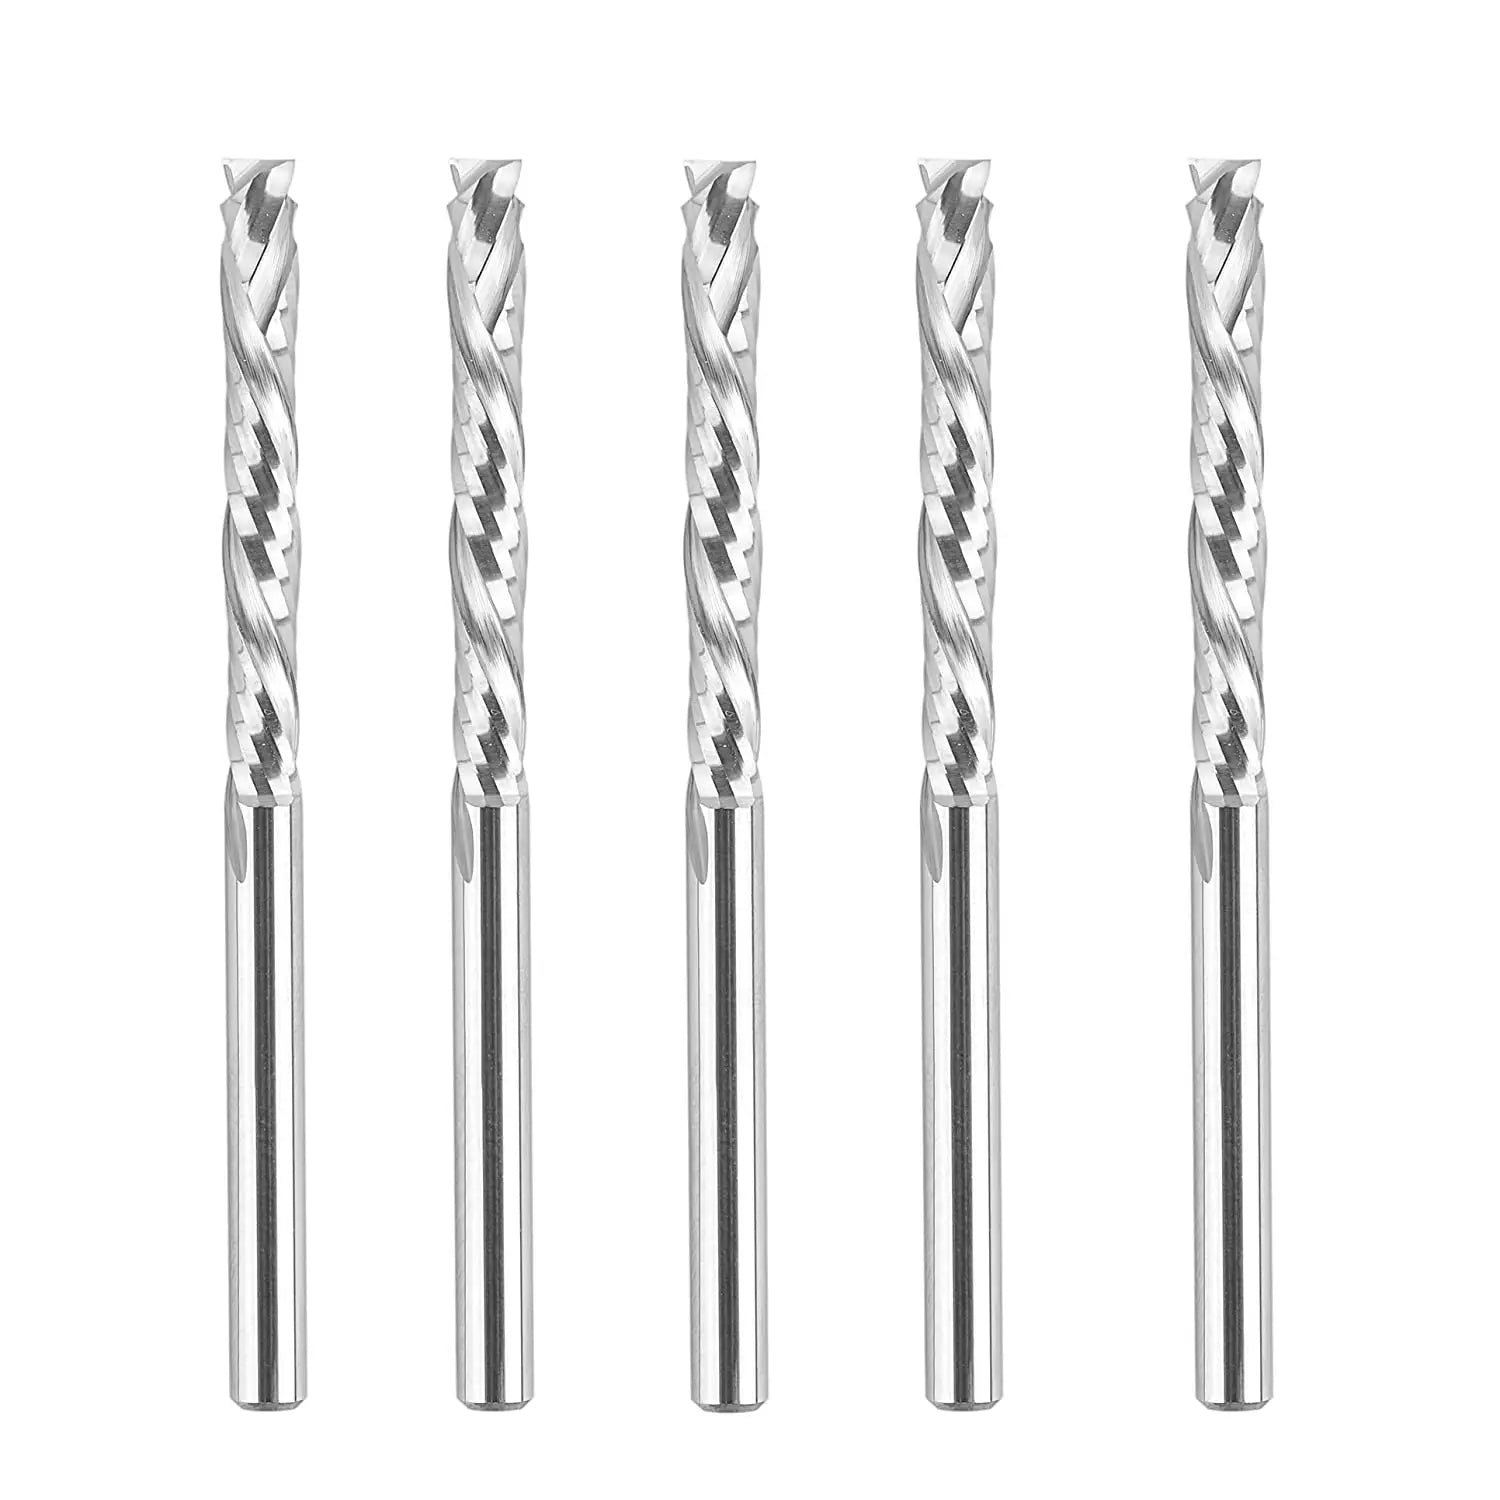 5-Pack Solid Carbide UP & DOWN 1 8 Diam 2 Long Router Bits SpeTool